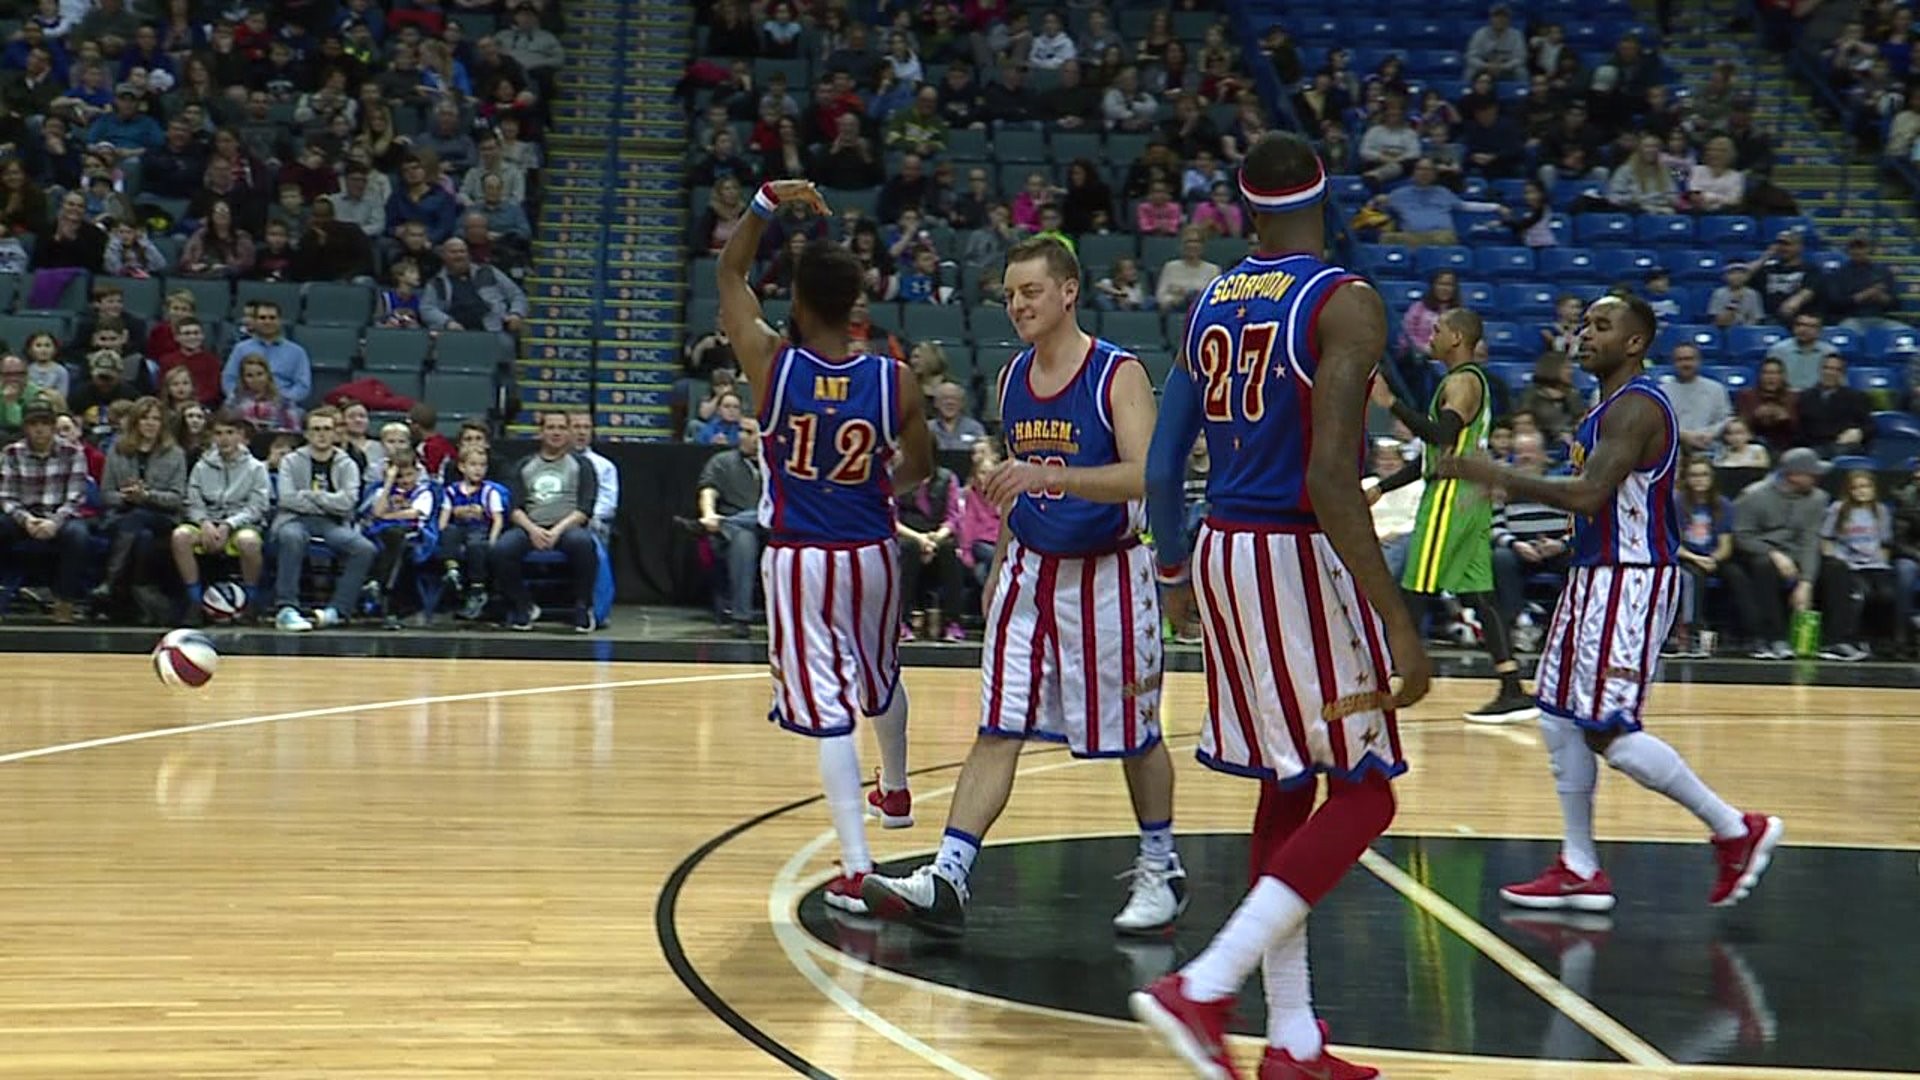 Newswatch 16's Chase Senior Hits the Court with the Globetrotters